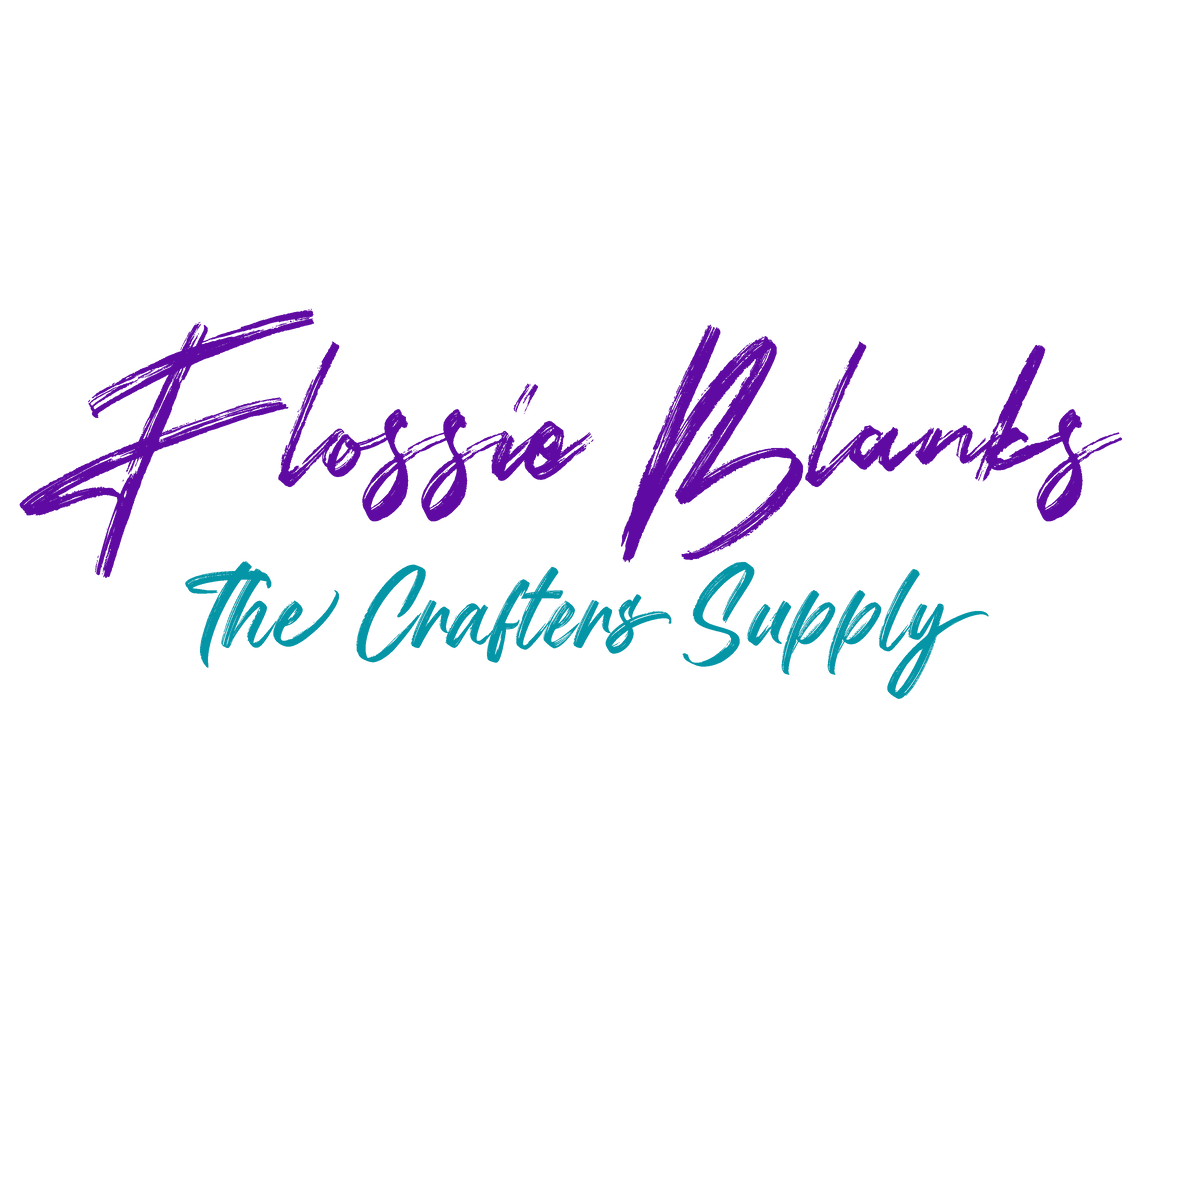 THE CRAFTERS SUPPLY – Flossie Blanks